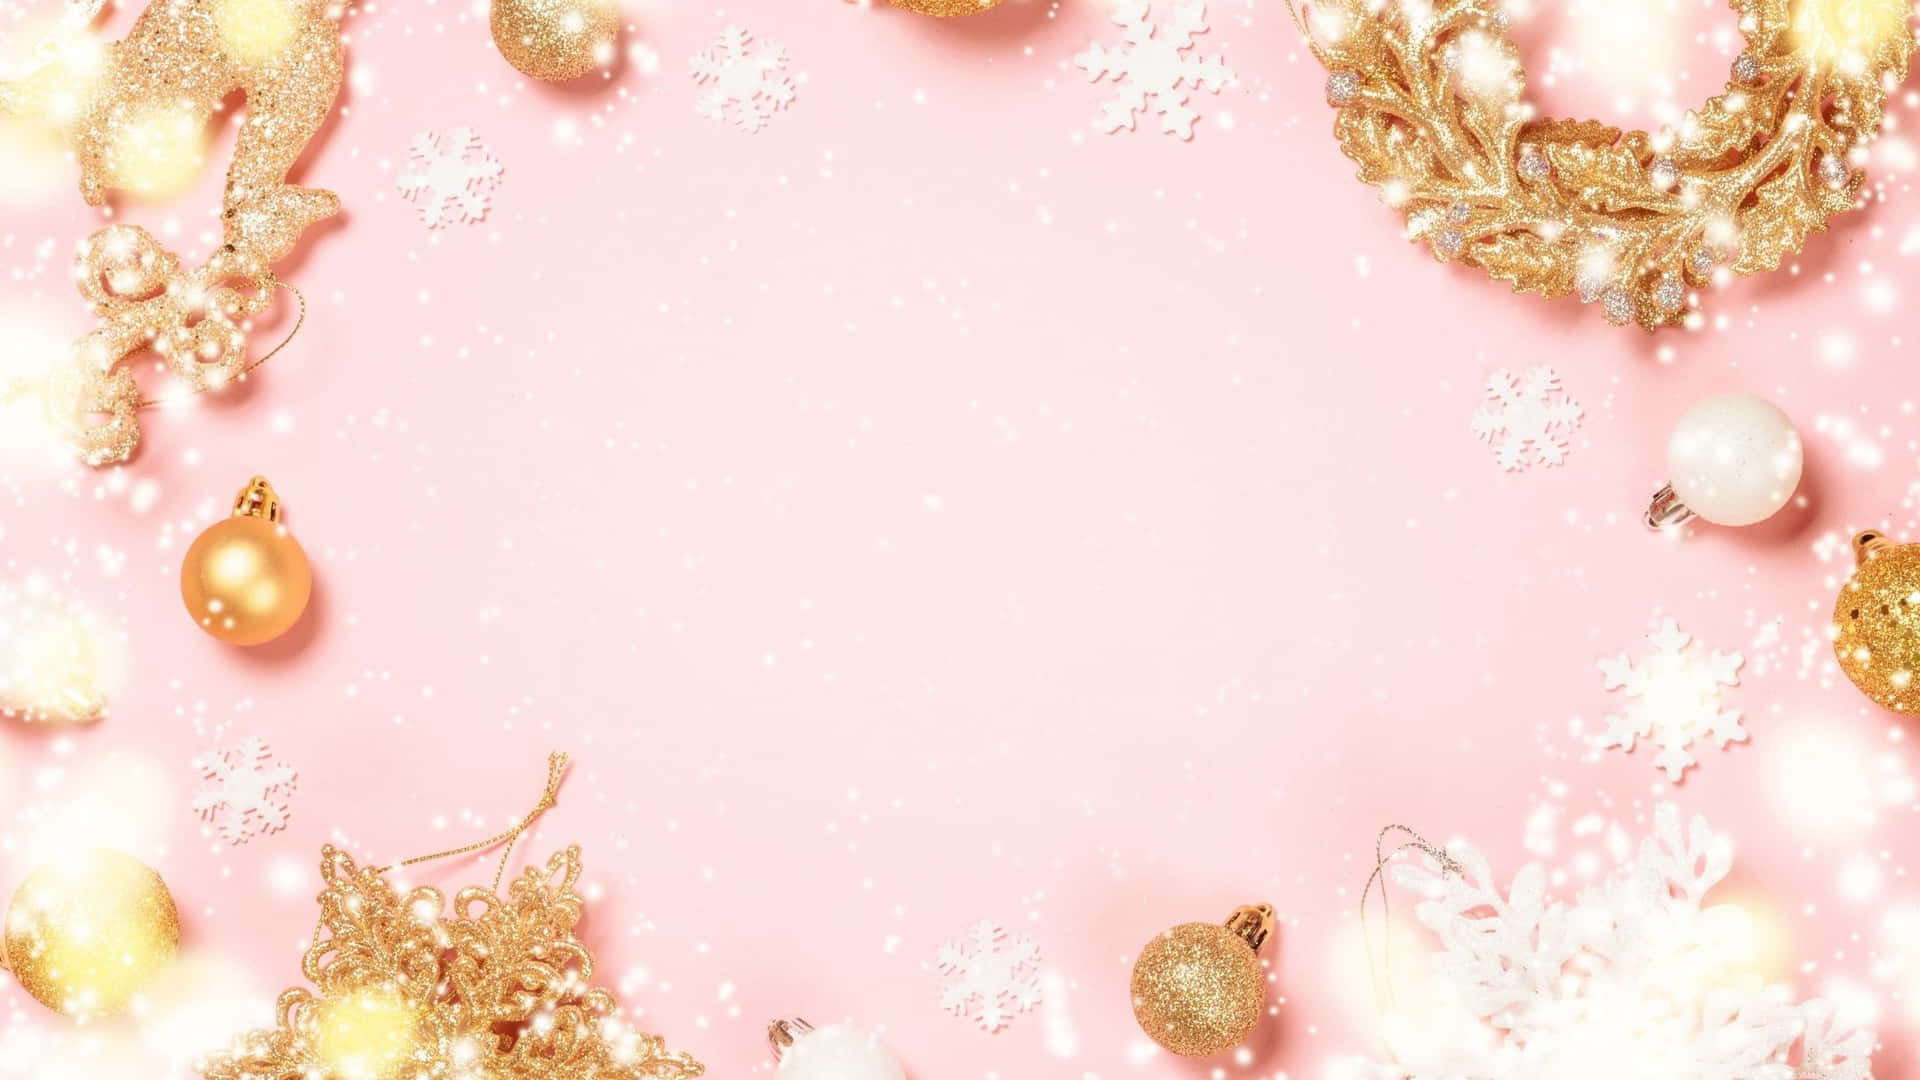 Christmas Background With Gold Decorations On Pink Background